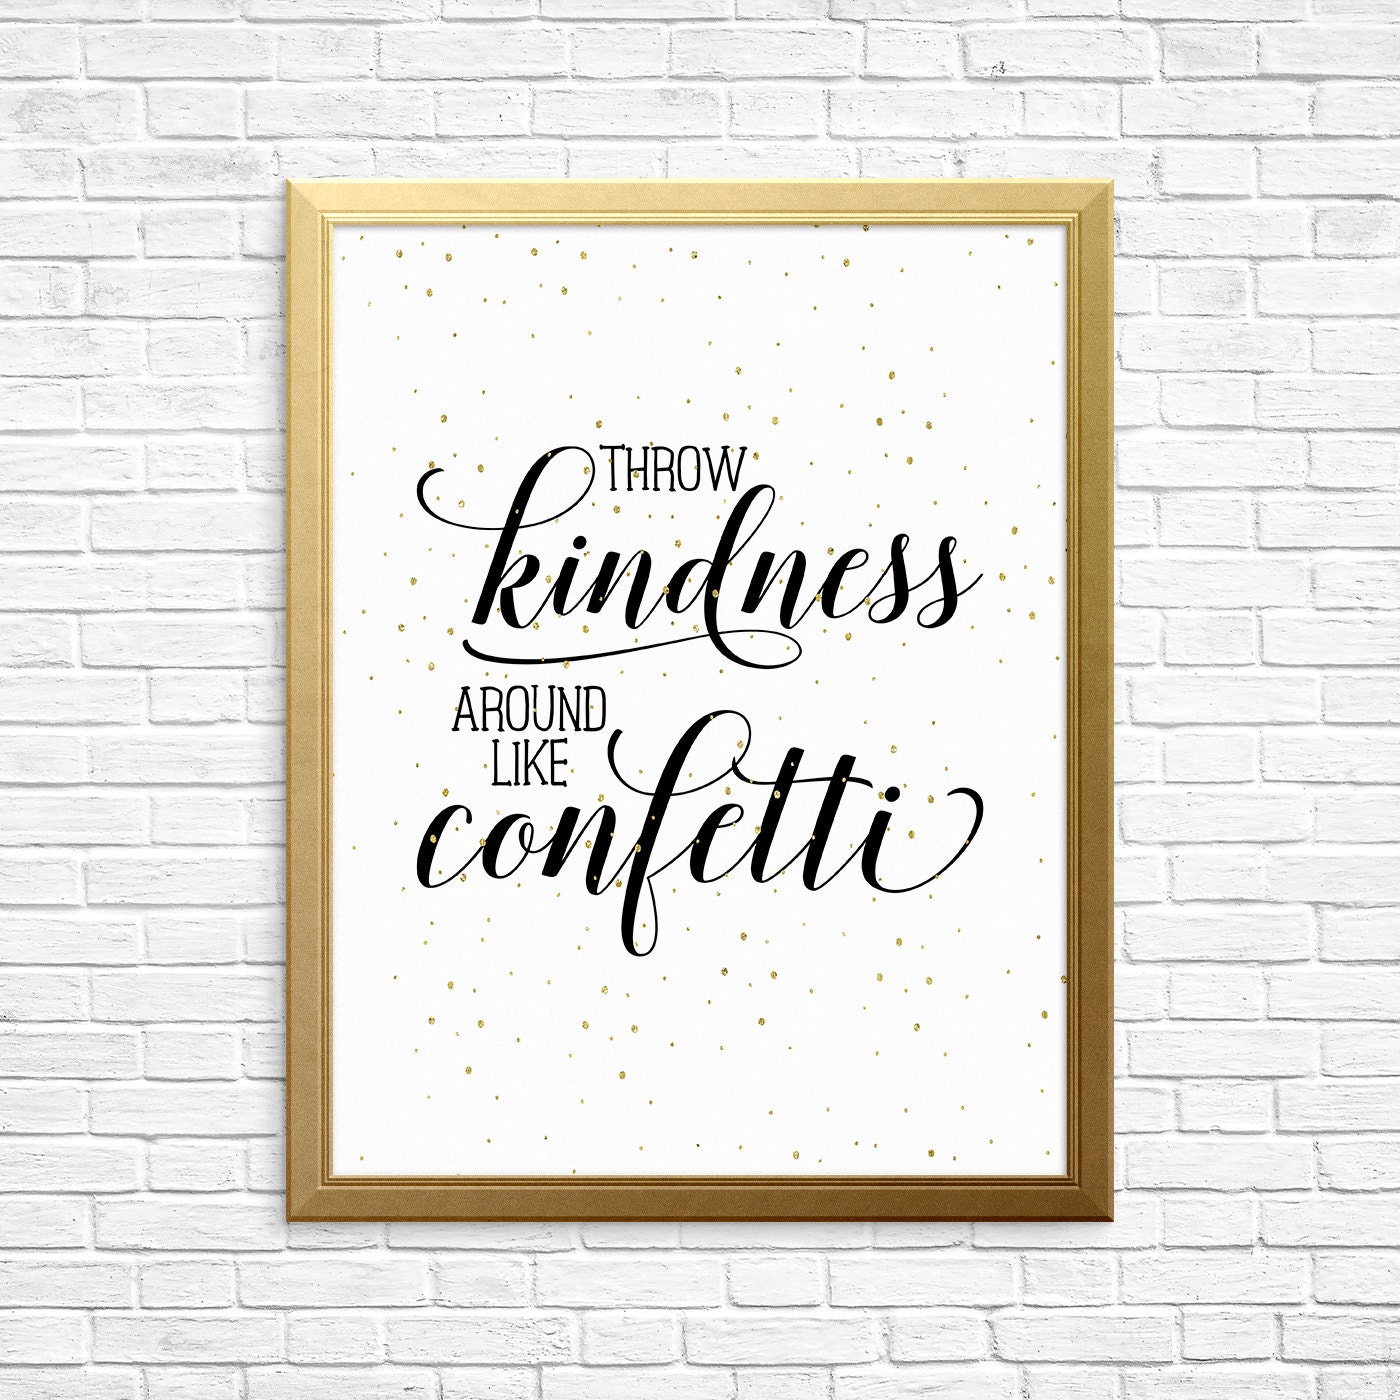 Printable Art, Print - Quote, Kindness Gold Throw Etsy Print, Kind, Wall Motivational Art Art, Decor, Around Typography Room Be Like Confetti